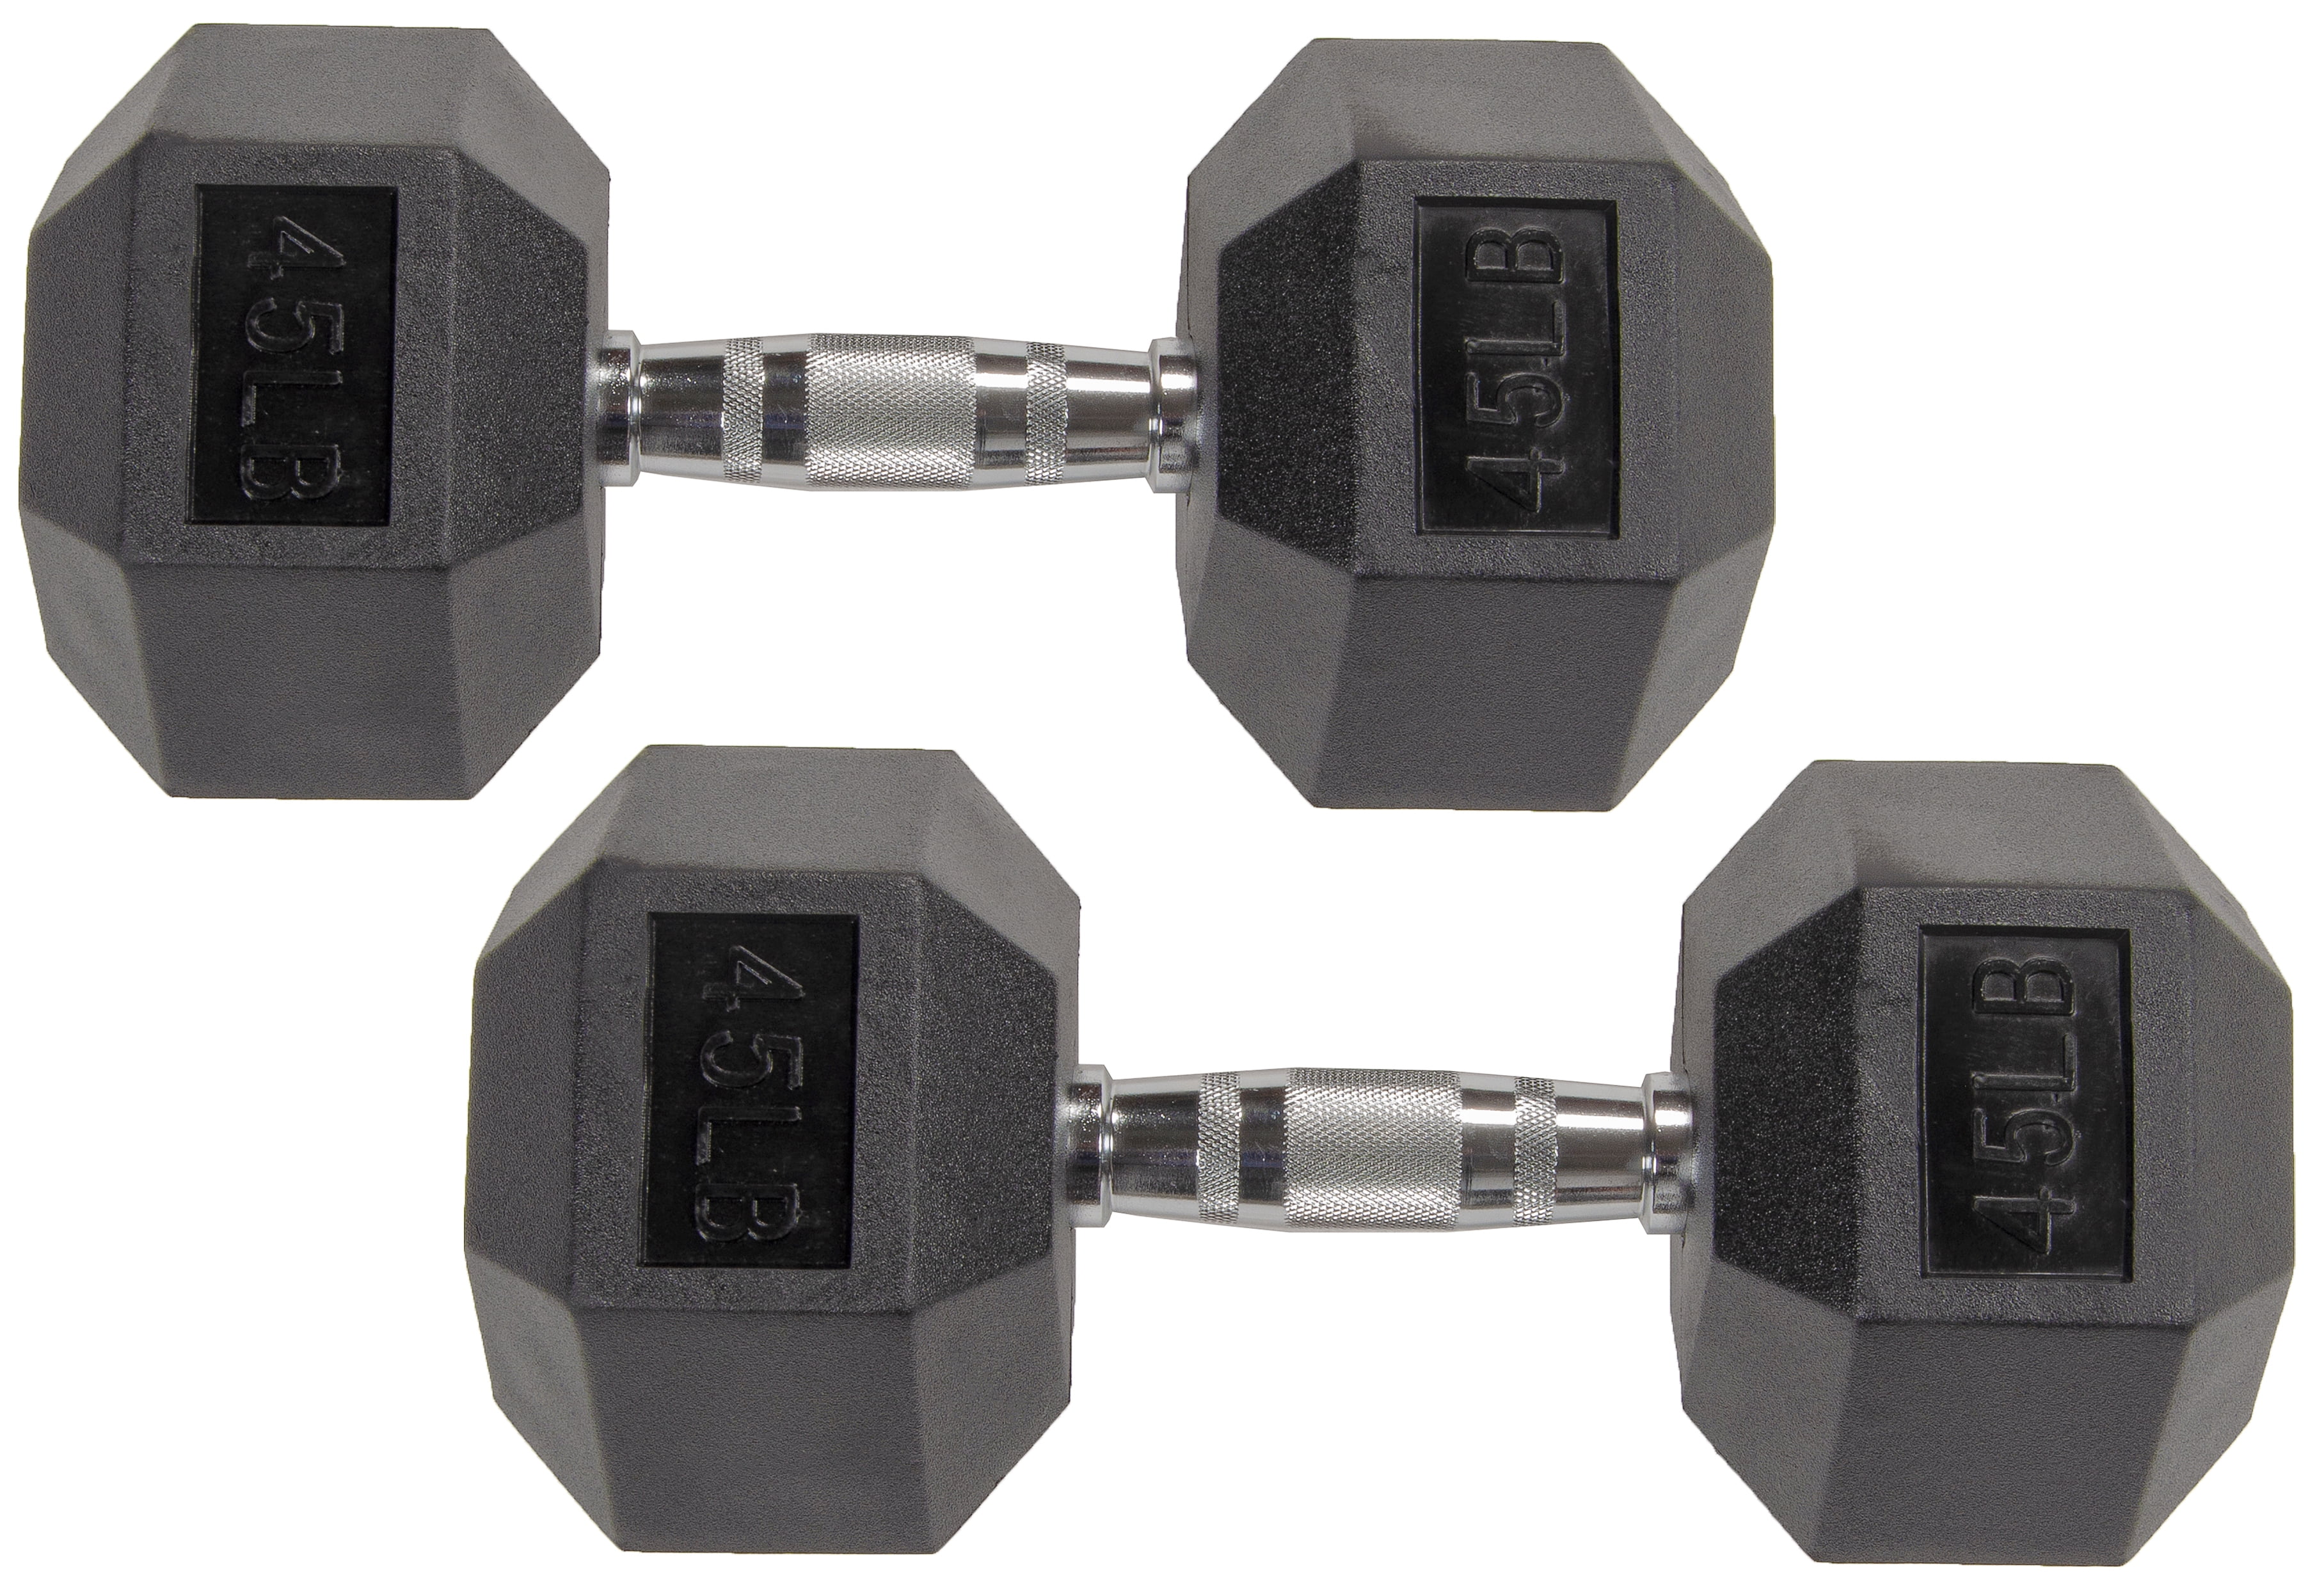 40 lbs total NEW 20 lb Pound PAIR of Rubber Coated Hex Dumbbells Free Shipping 